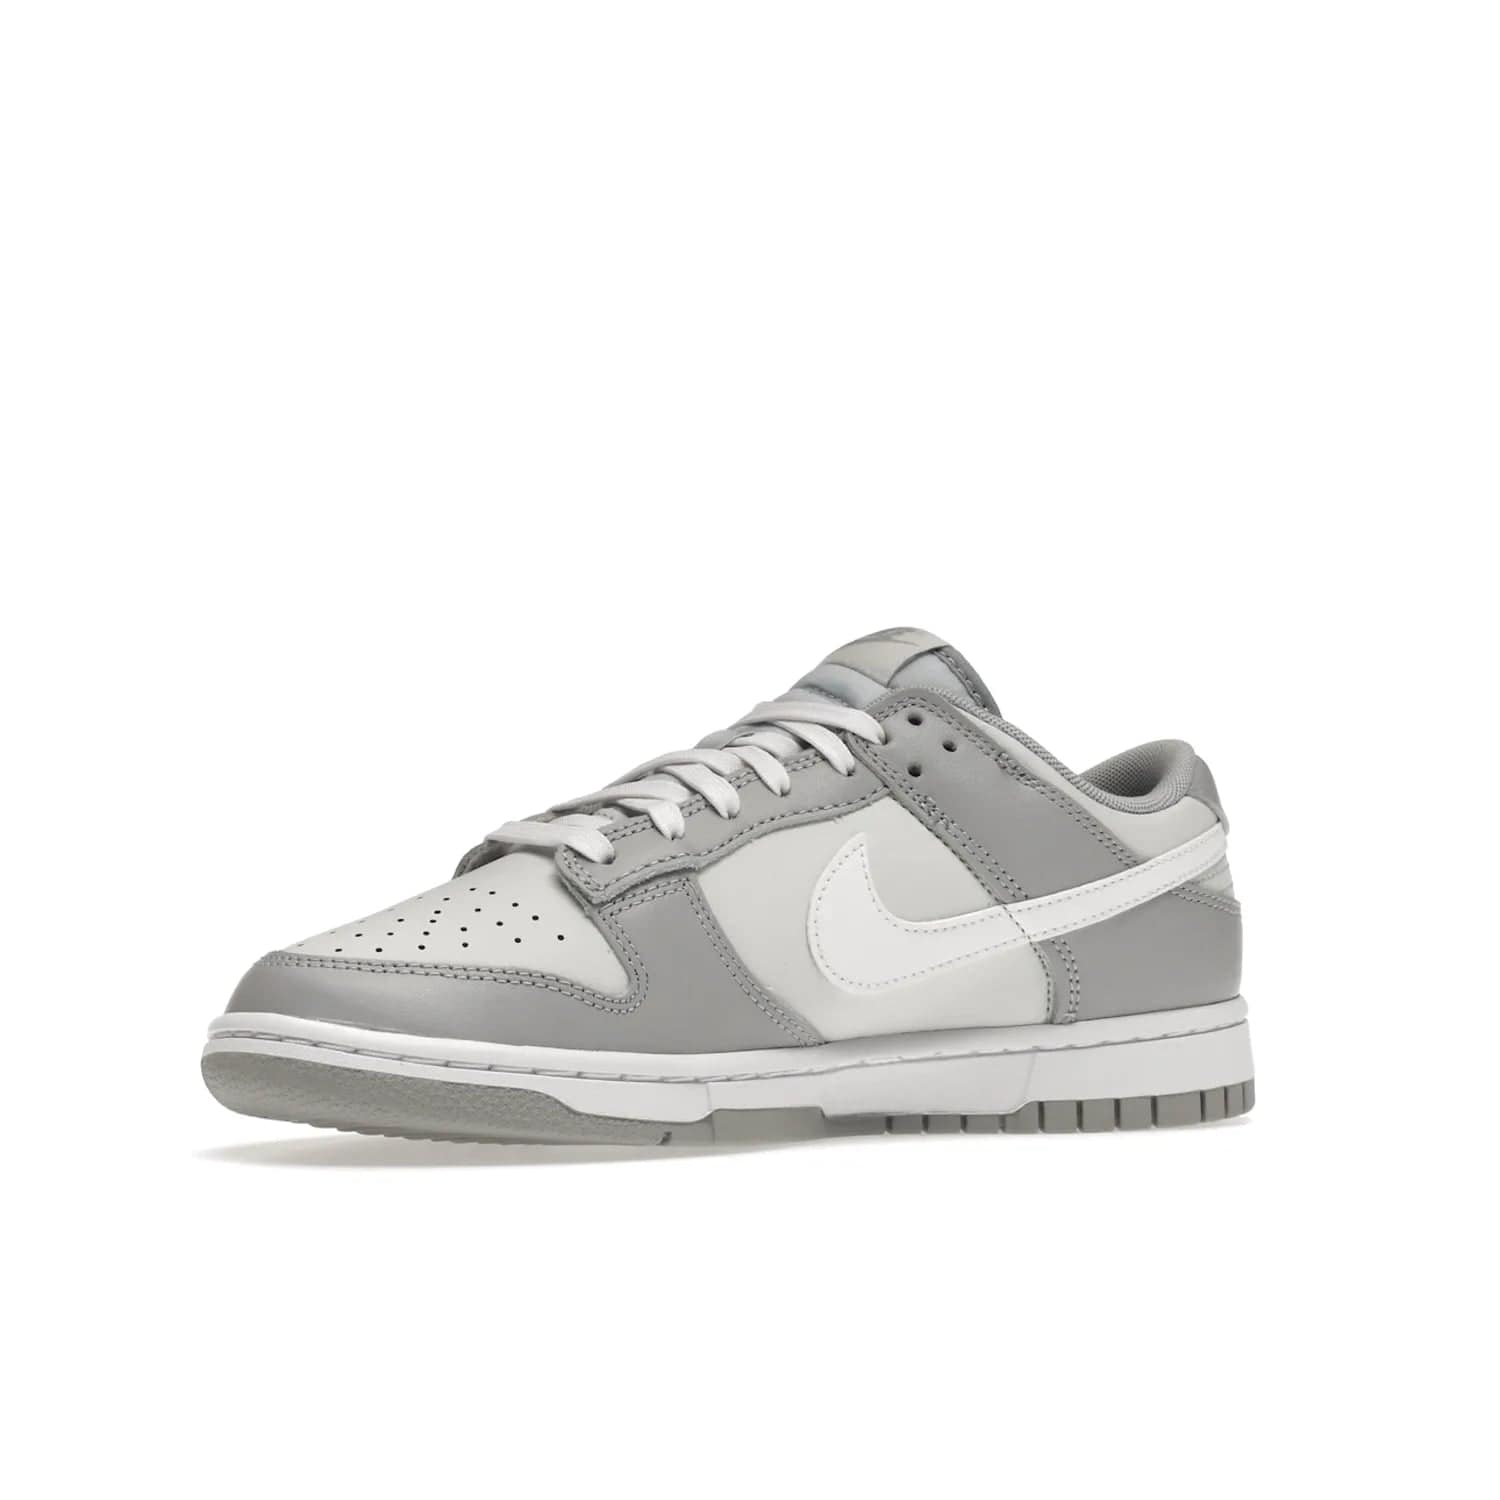 Nike Dunk Low Two Tone Grey - Image 16 - Only at www.BallersClubKickz.com - Fresh Nike Dunk Low Two Tone Grey leather/overlay Sneaker. White Swoosh detailing, nylon tongue, woven label and Air Sole. Get yours and stay on the trend.